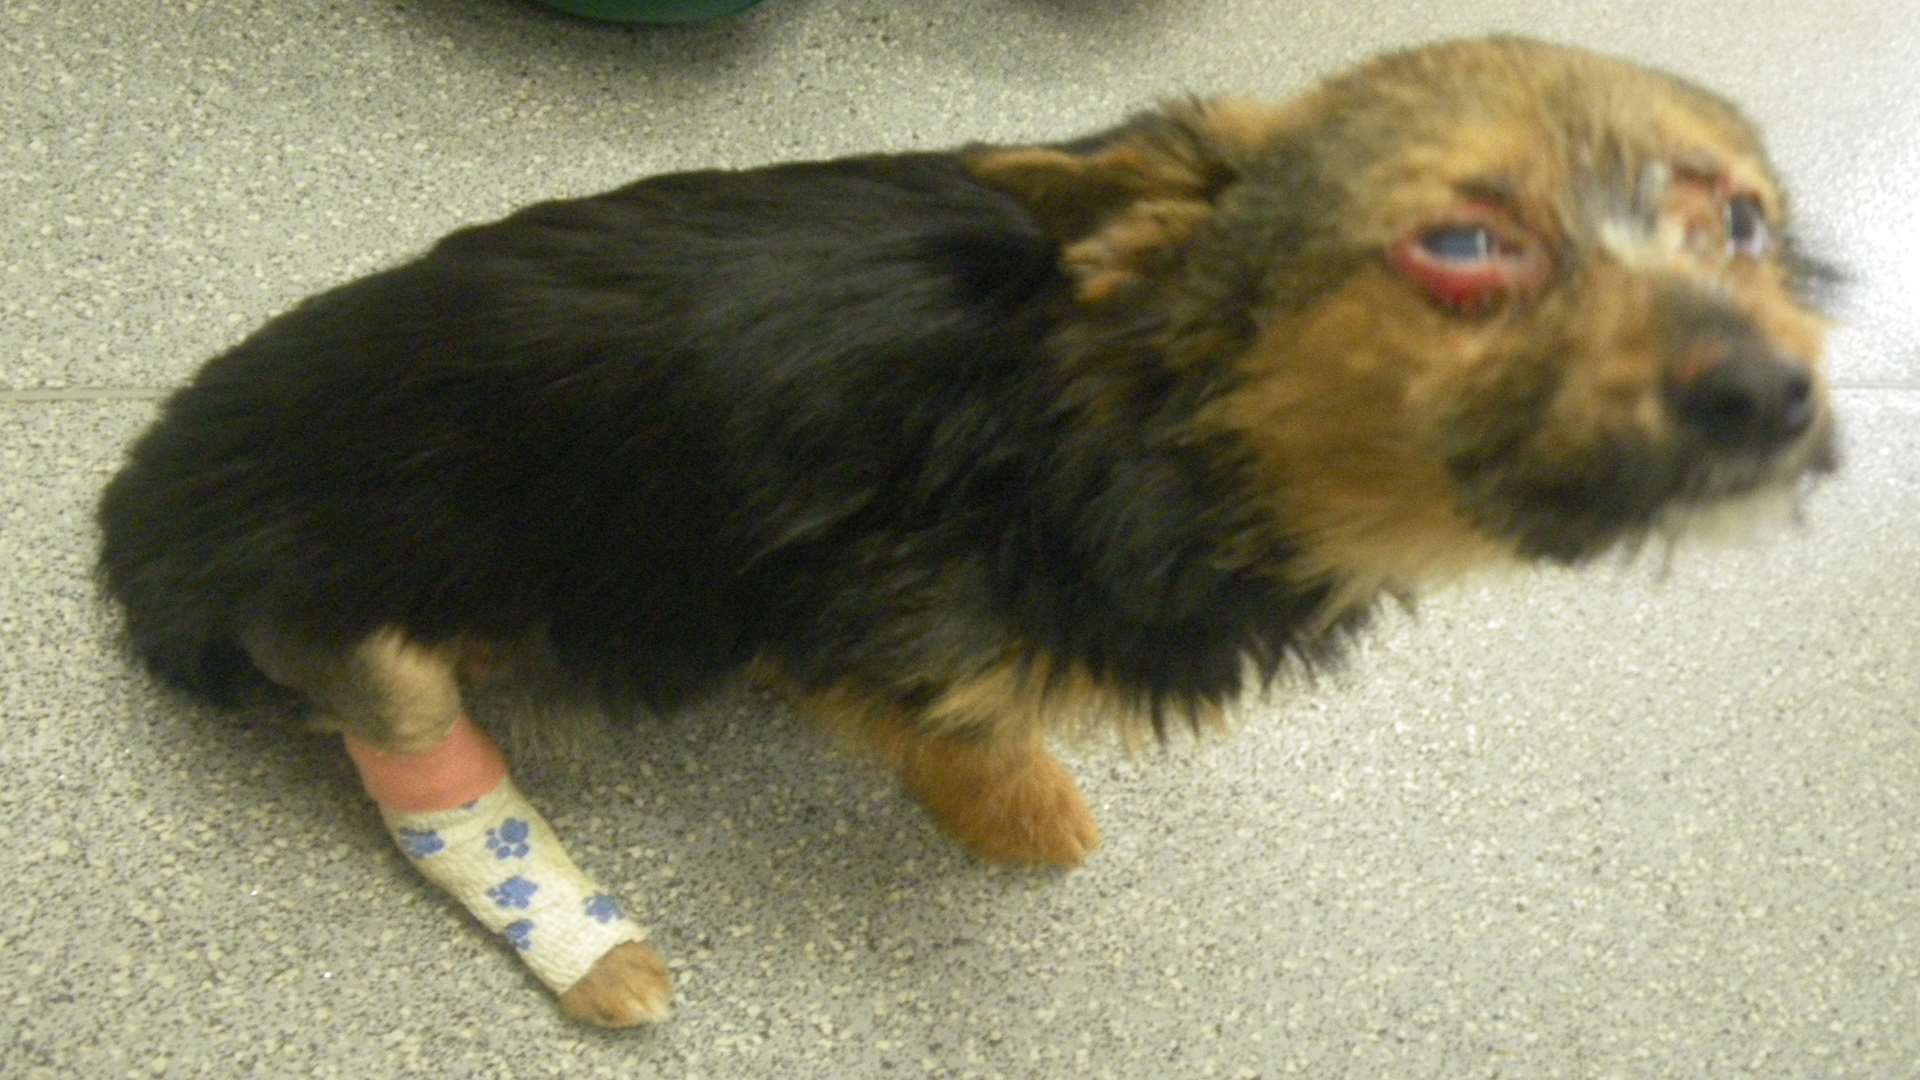 Chunky suffered severe injuries including a broken neck and leg